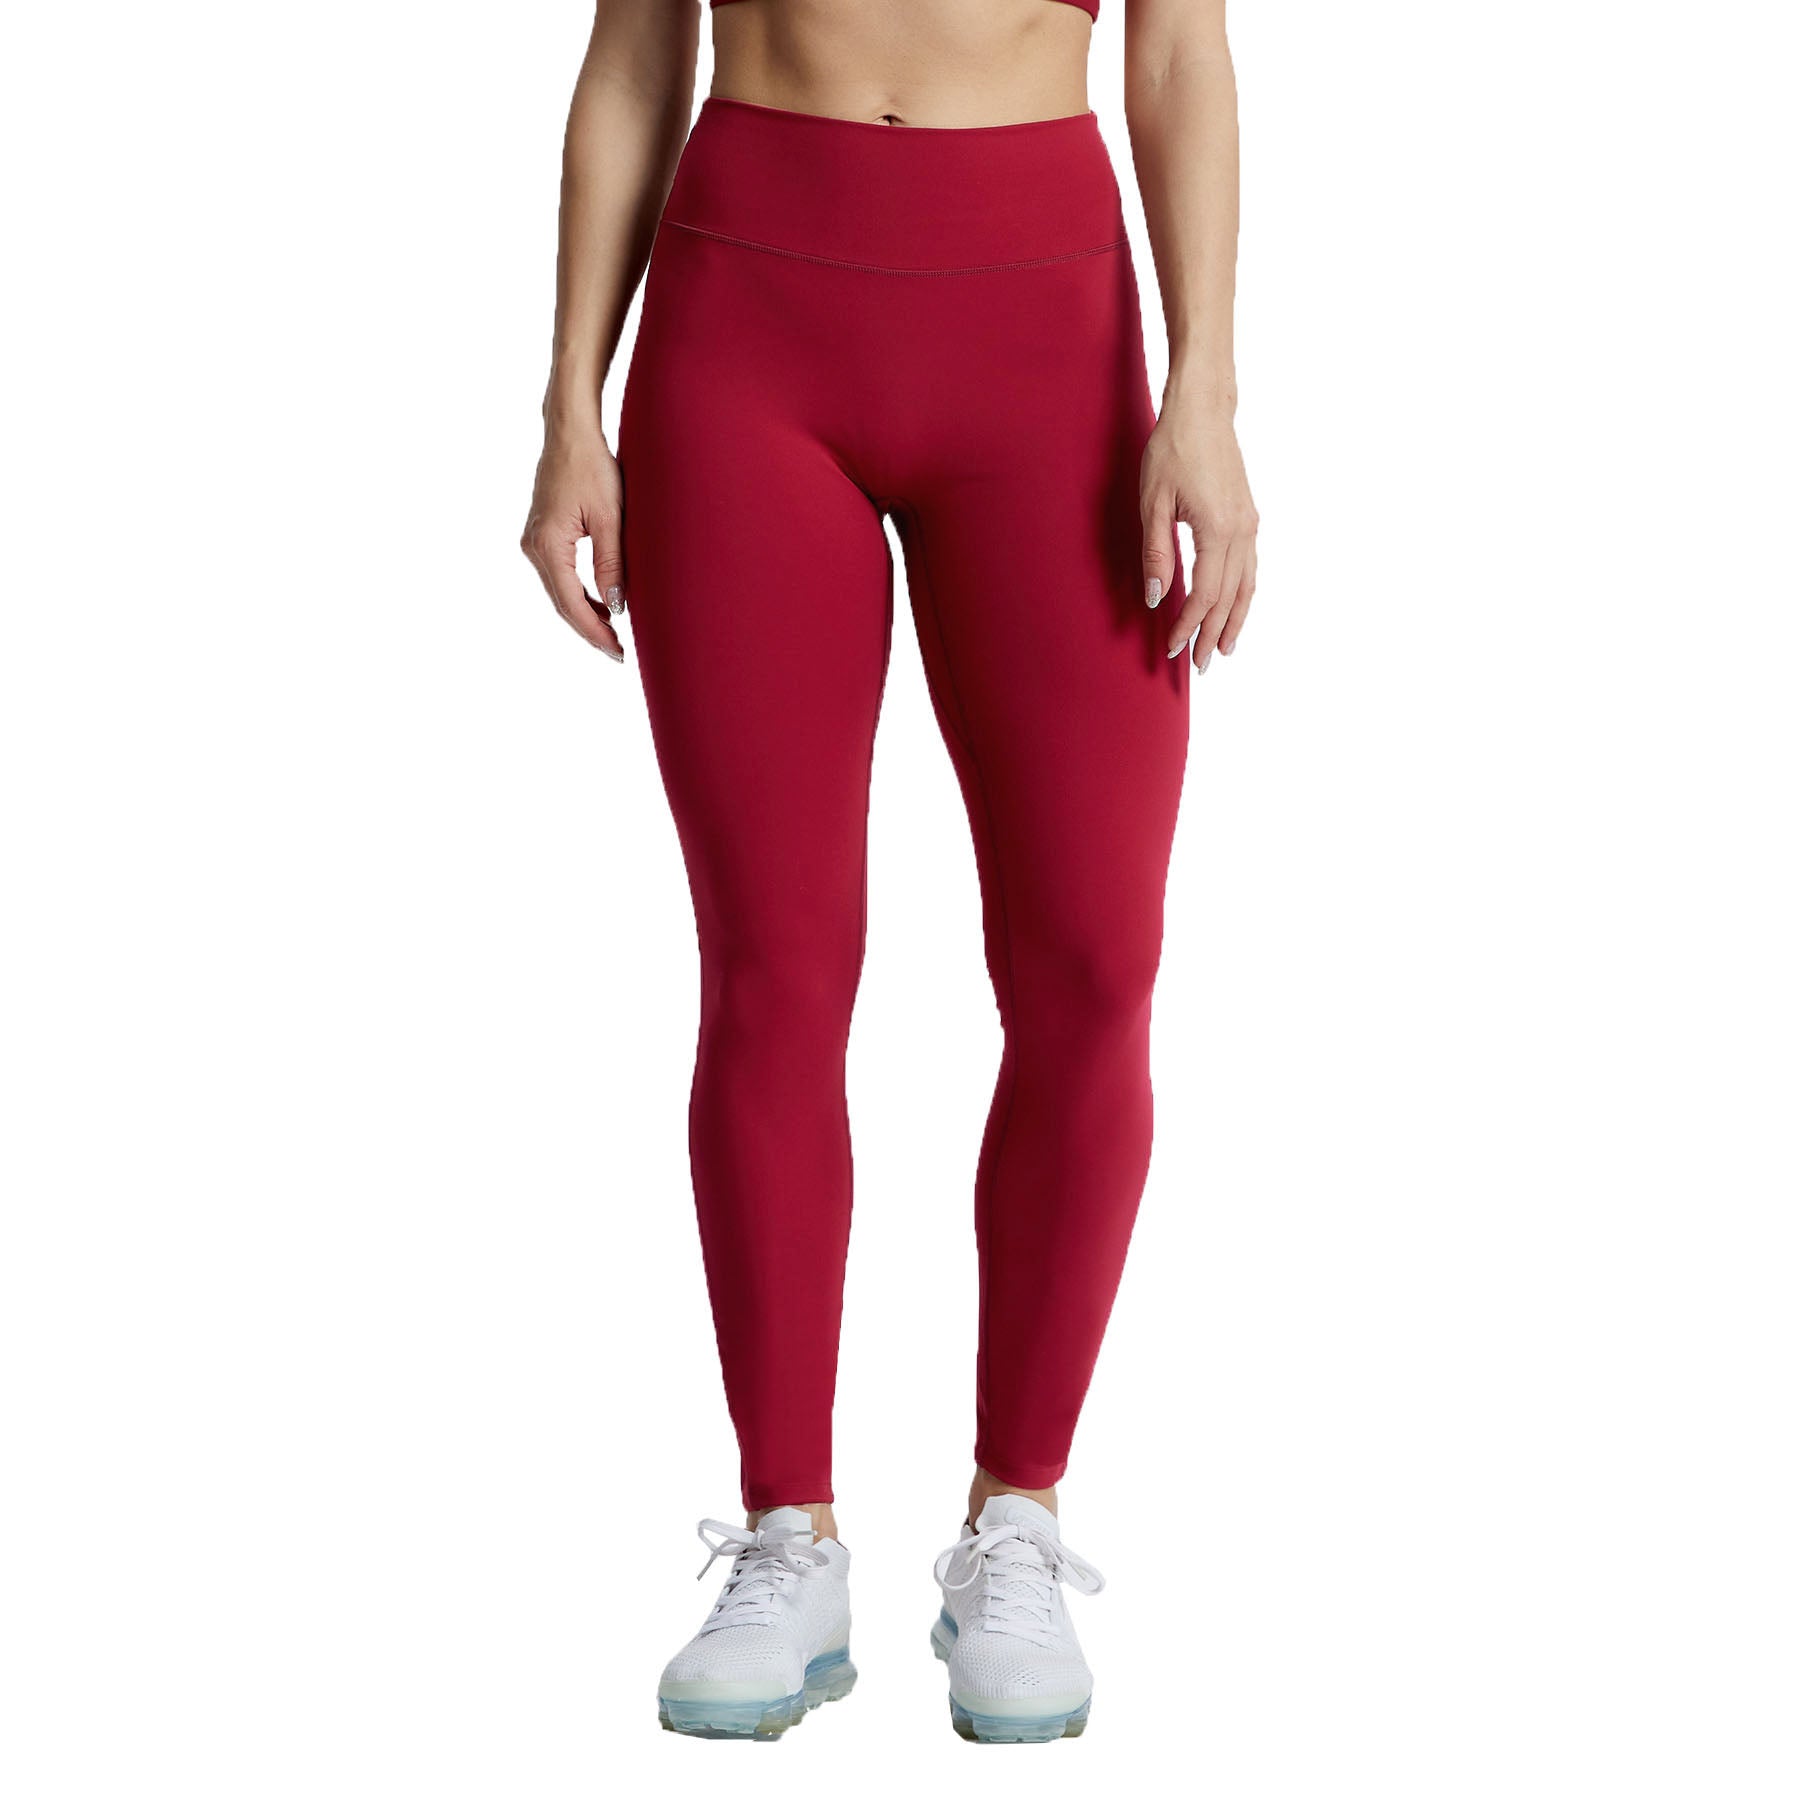 Aoxjox Trinity High Waisted Yoga Pants with Pockets for Women Tummy Control  Cross-Waist Crossover Workout Leggings, B Iron Grey (Regular Waistband),  Large : Buy Online at Best Price in KSA - Souq